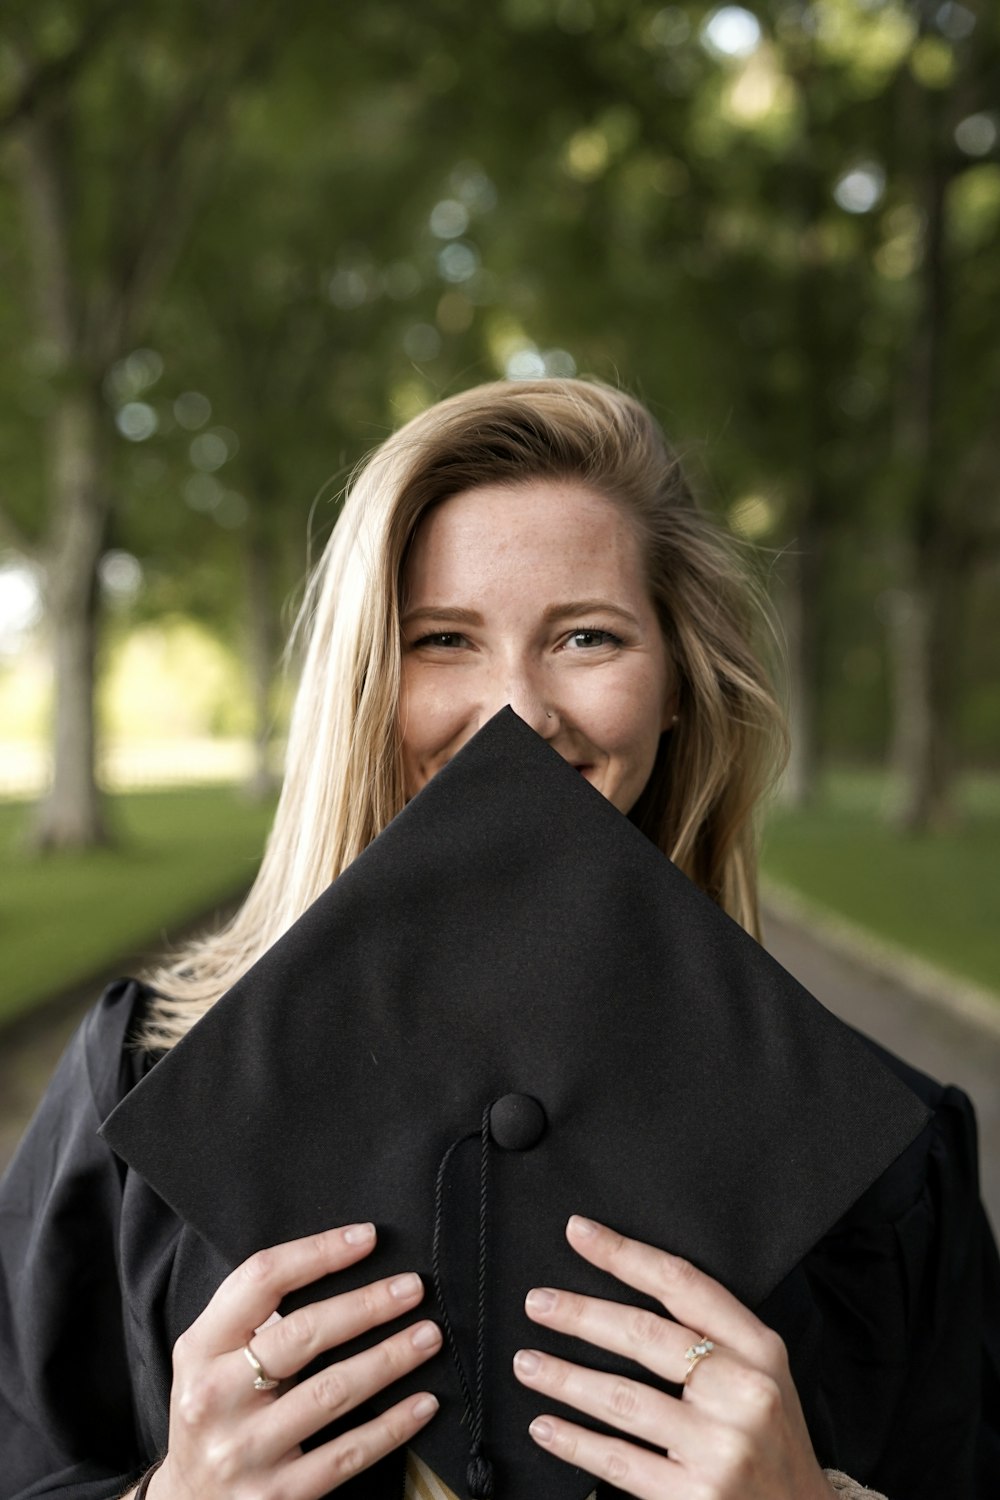 smiling woman slightly covering face with mortar board